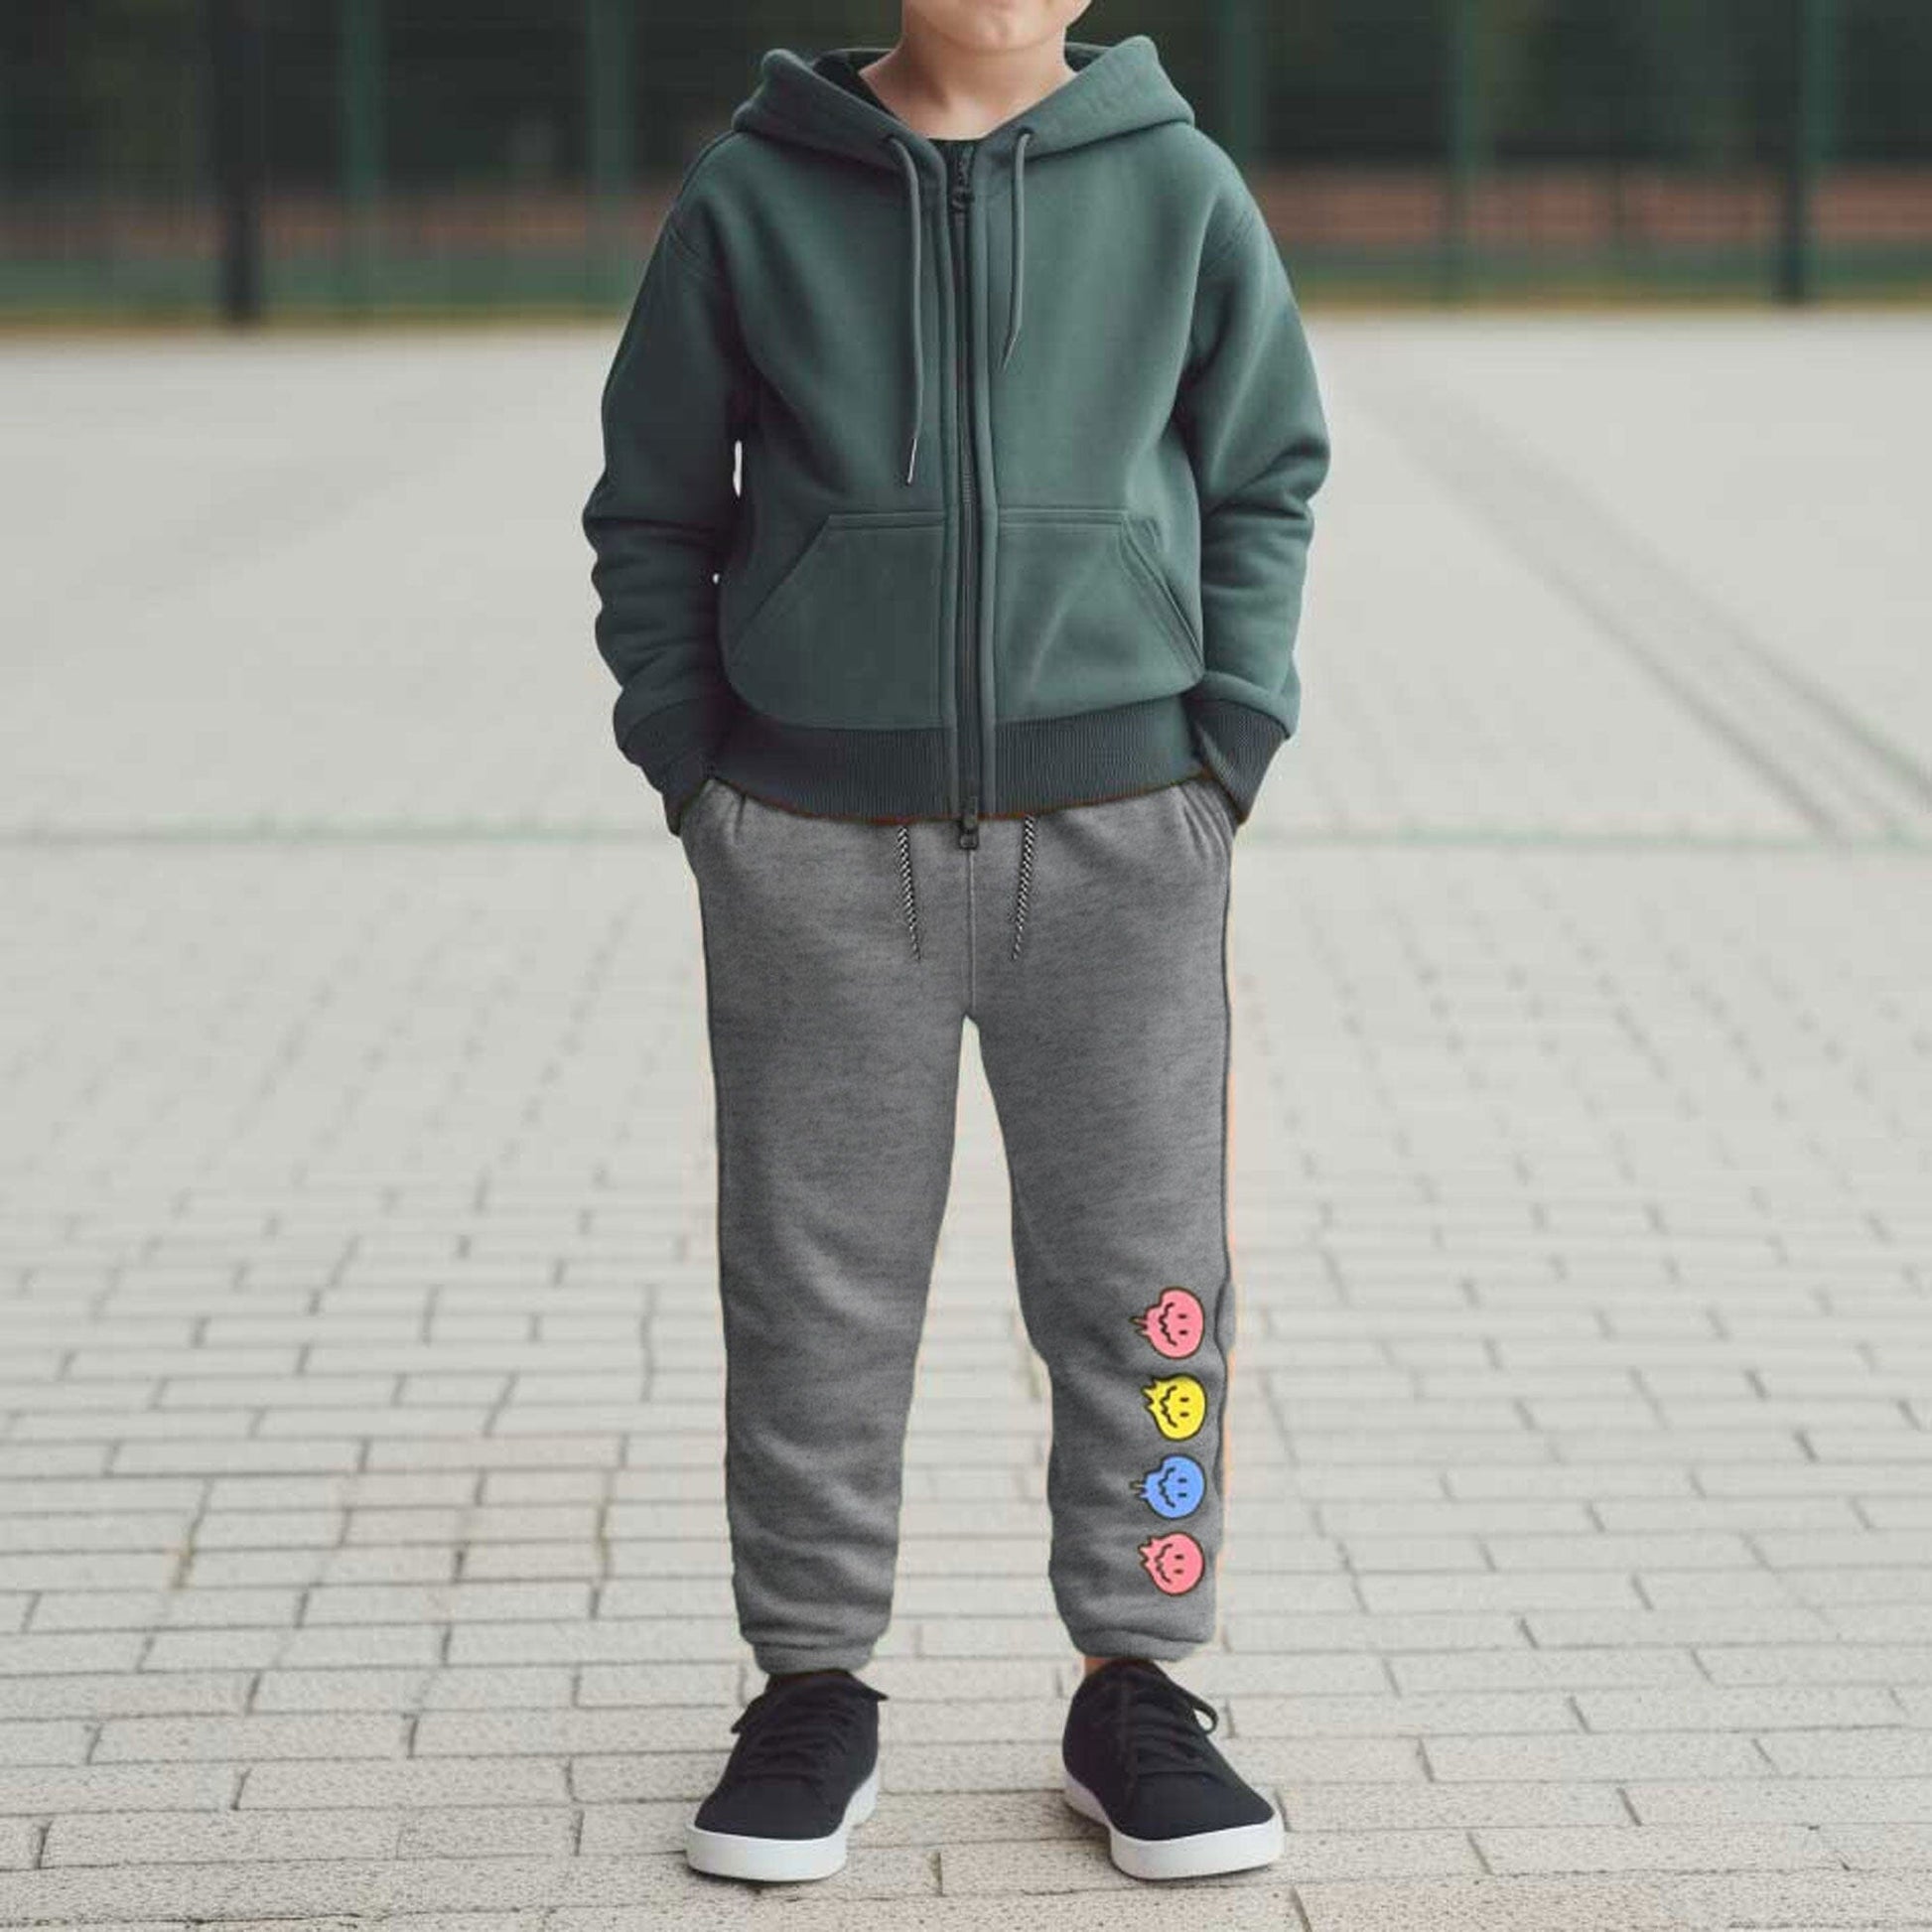 Max 21 Kid's Printed Design Fleece Trousers Boy's Trousers SZK Heather Grey 3-4 Years 